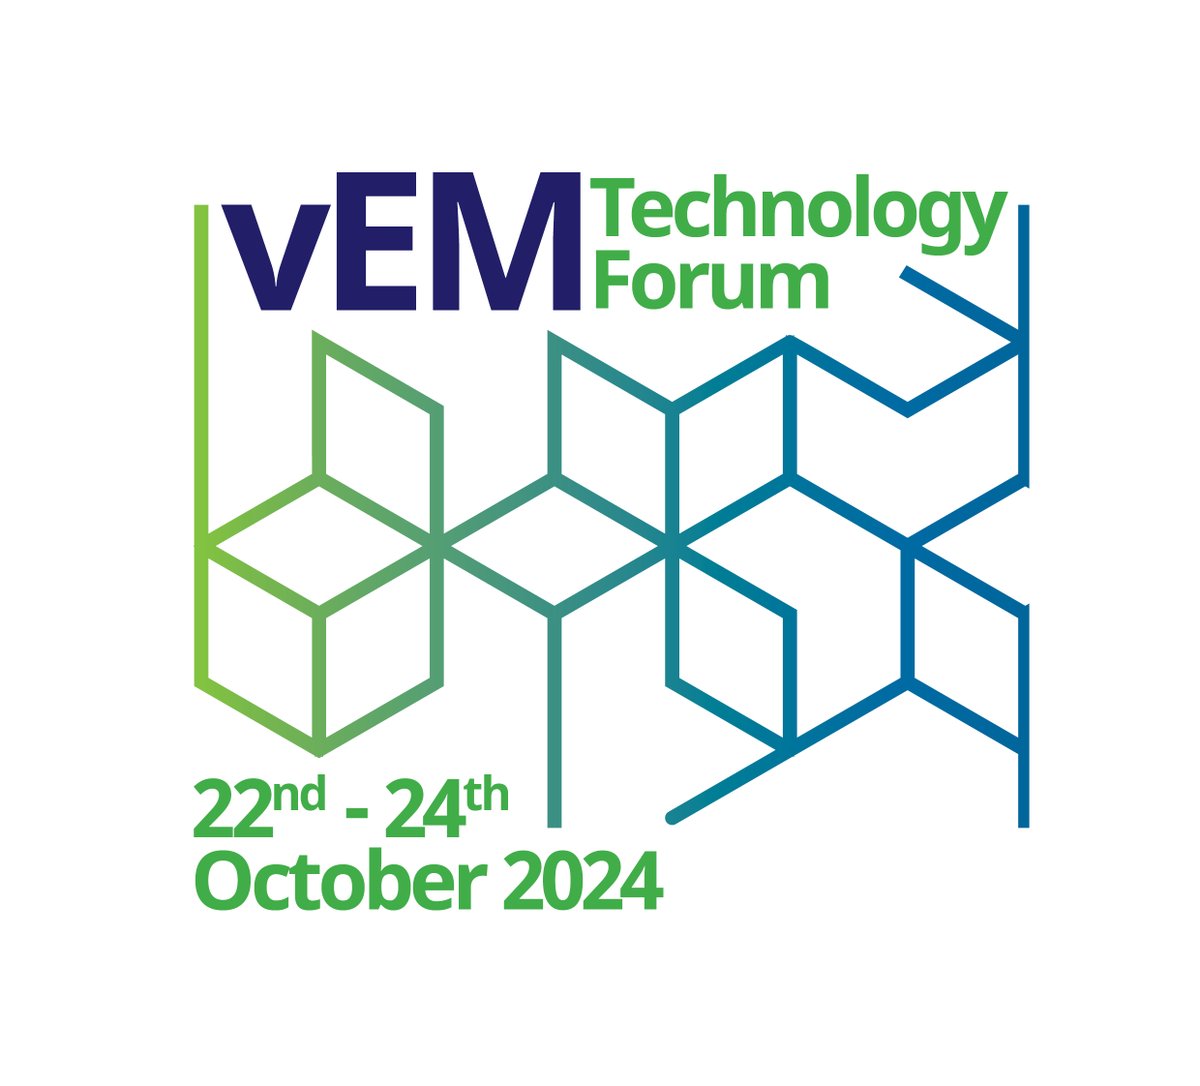 We are excited to be hosting the inaugural Volume EM Technology Forum, taking place from the 22nd - 24th October 2024. Registration is open and you can find more information about the forum here: zurl.co/6NAI @VolumeEM1